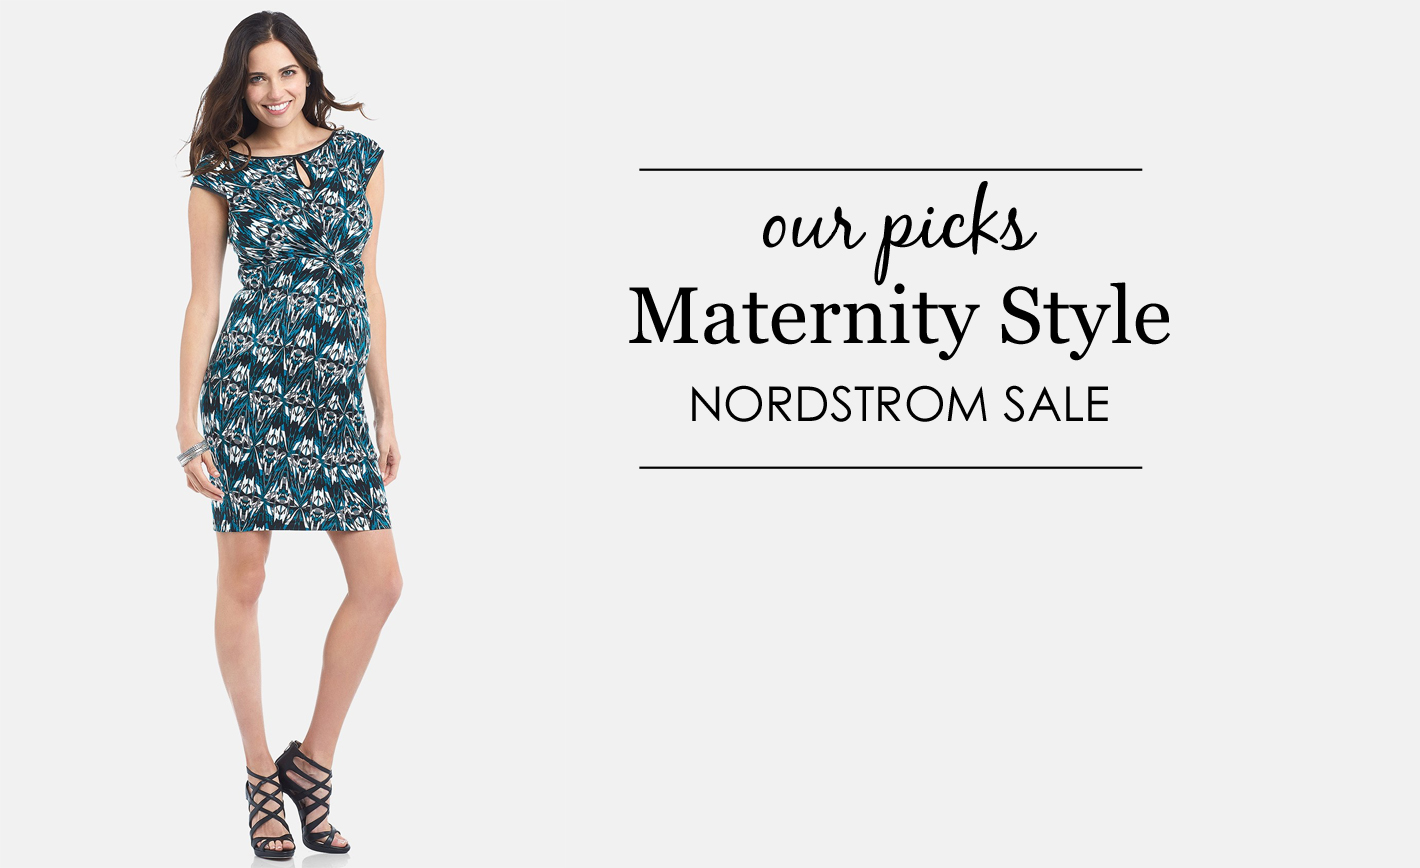 The Best of the Nordstrom Half-Yearly Style, Baby Bump Edition